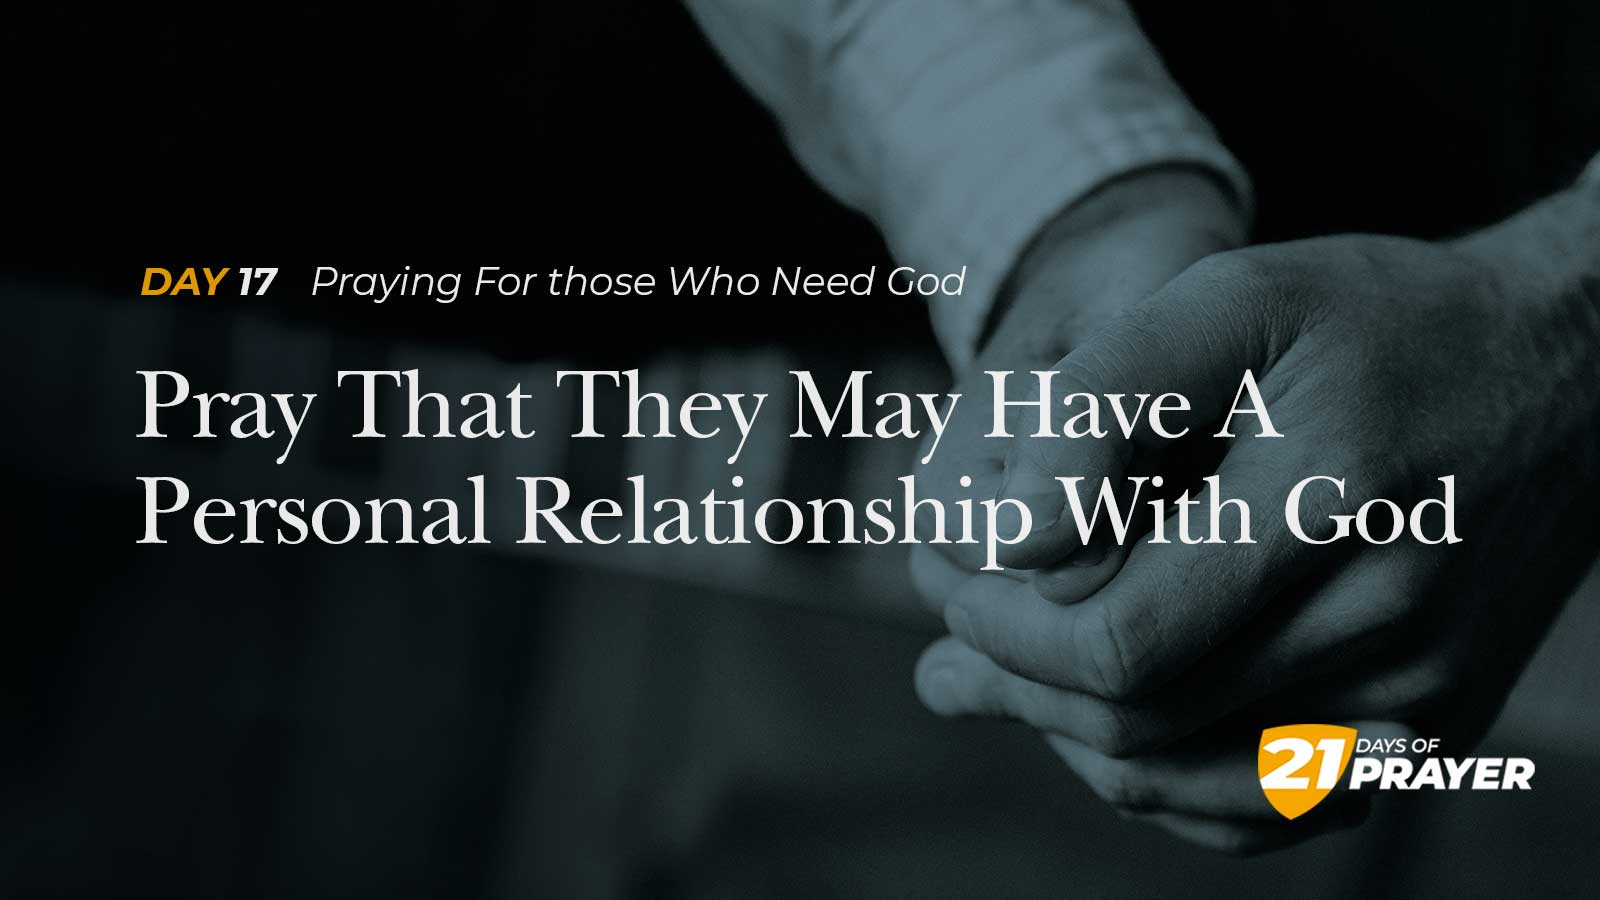 Day 17: PRAY THAT THEY MAY HAVE A PERSONAL RELATIONSHIP WITH GOD